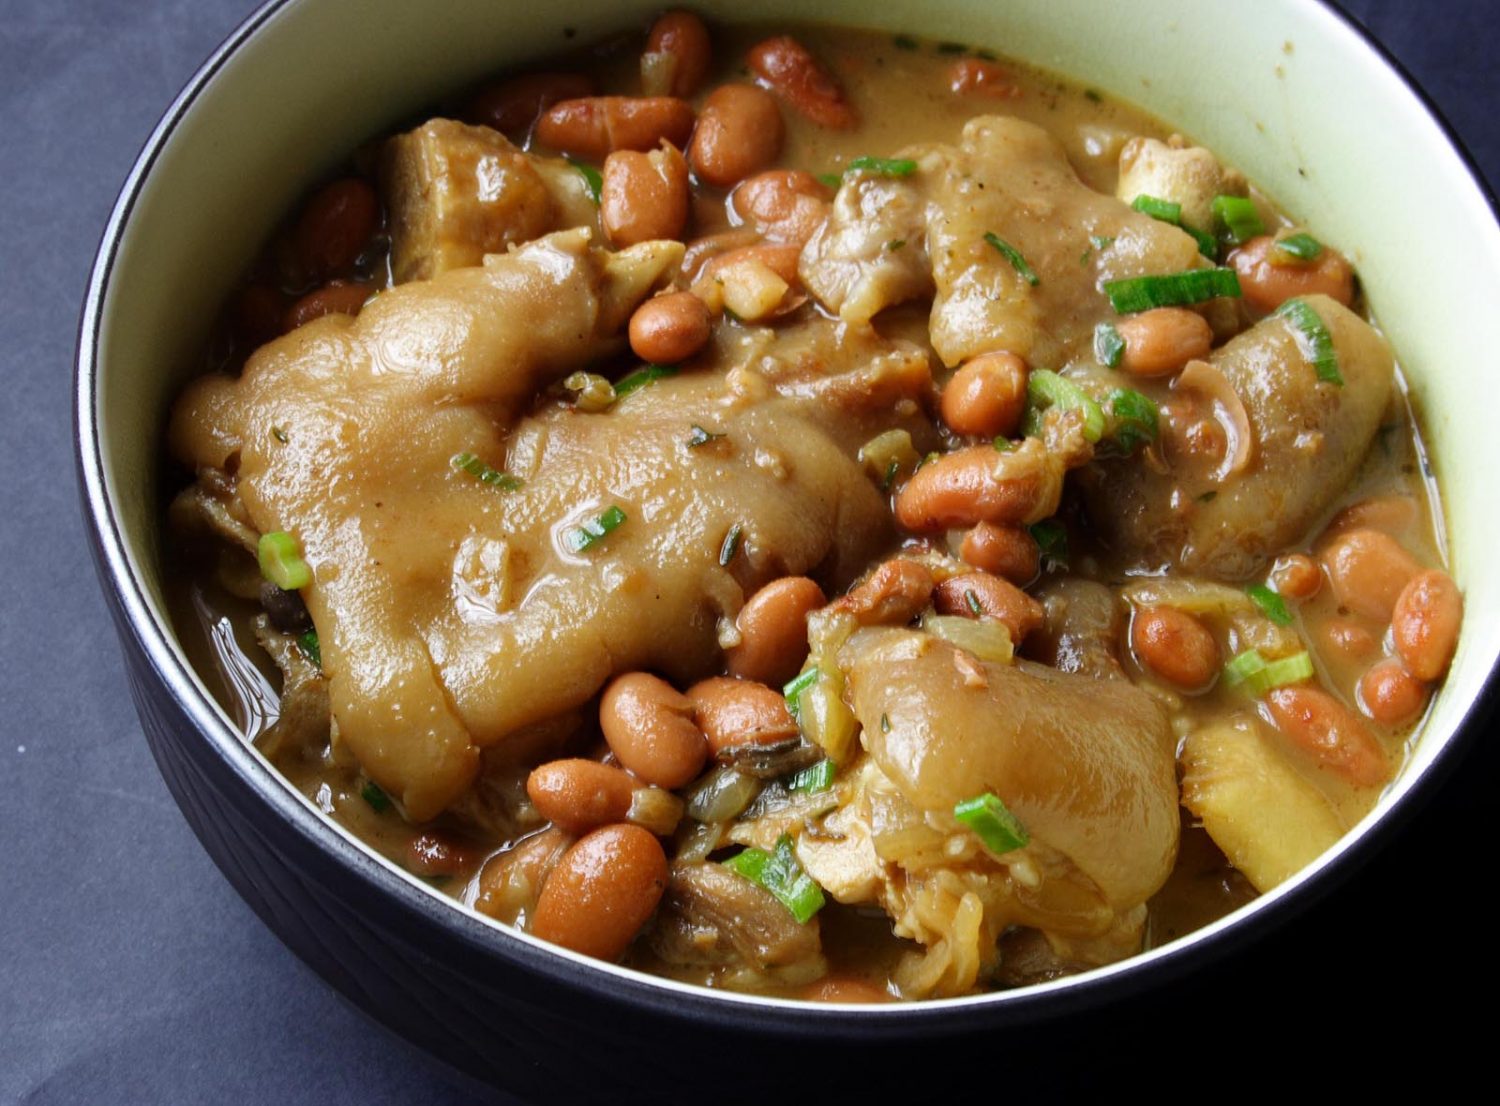 Stewed Pig Trotters with Pinto Beans (Photo by Cynthia Nelson)